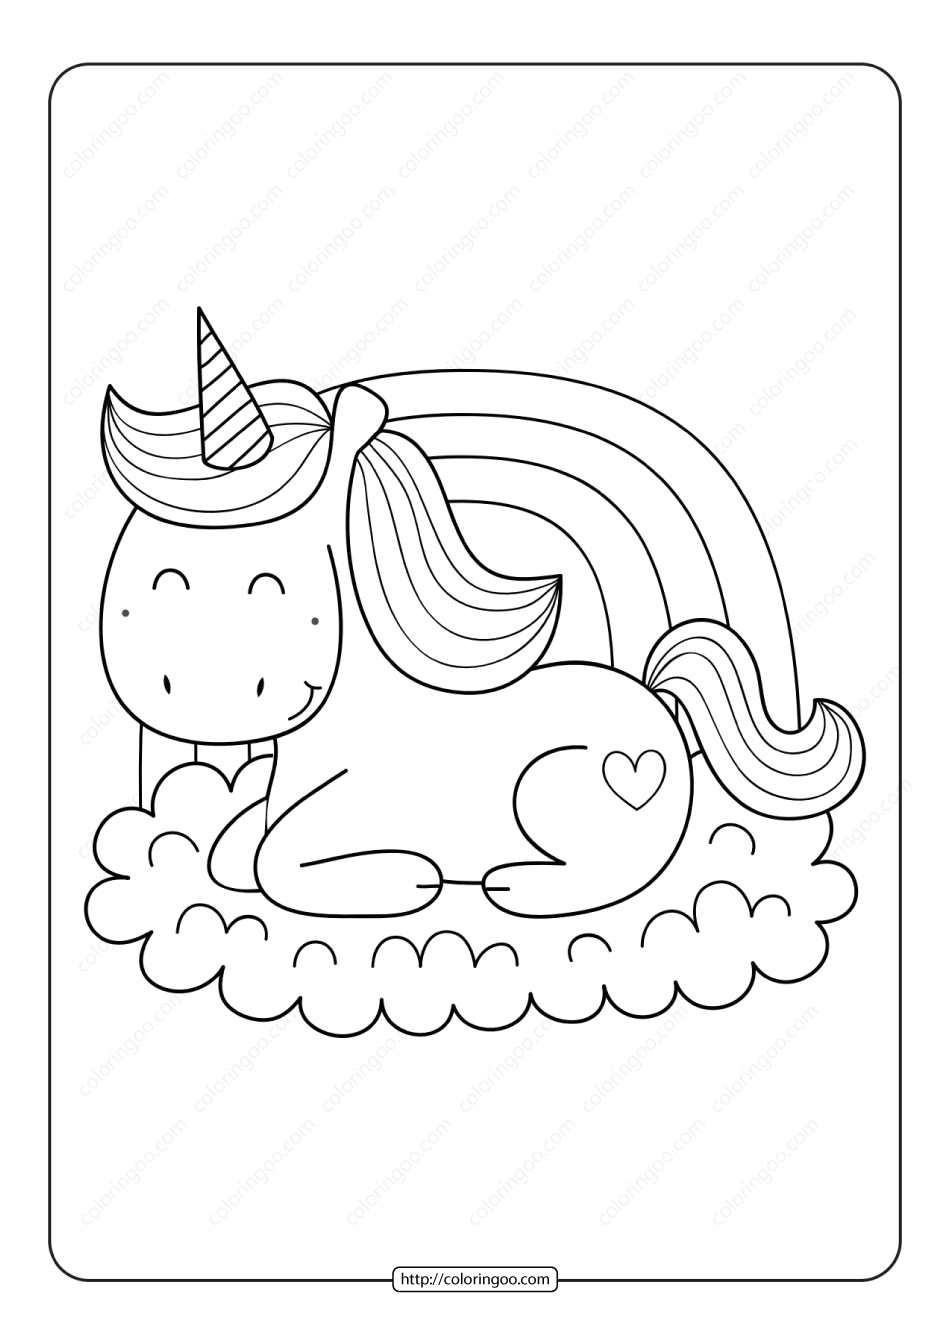 unicorn coloring page 03